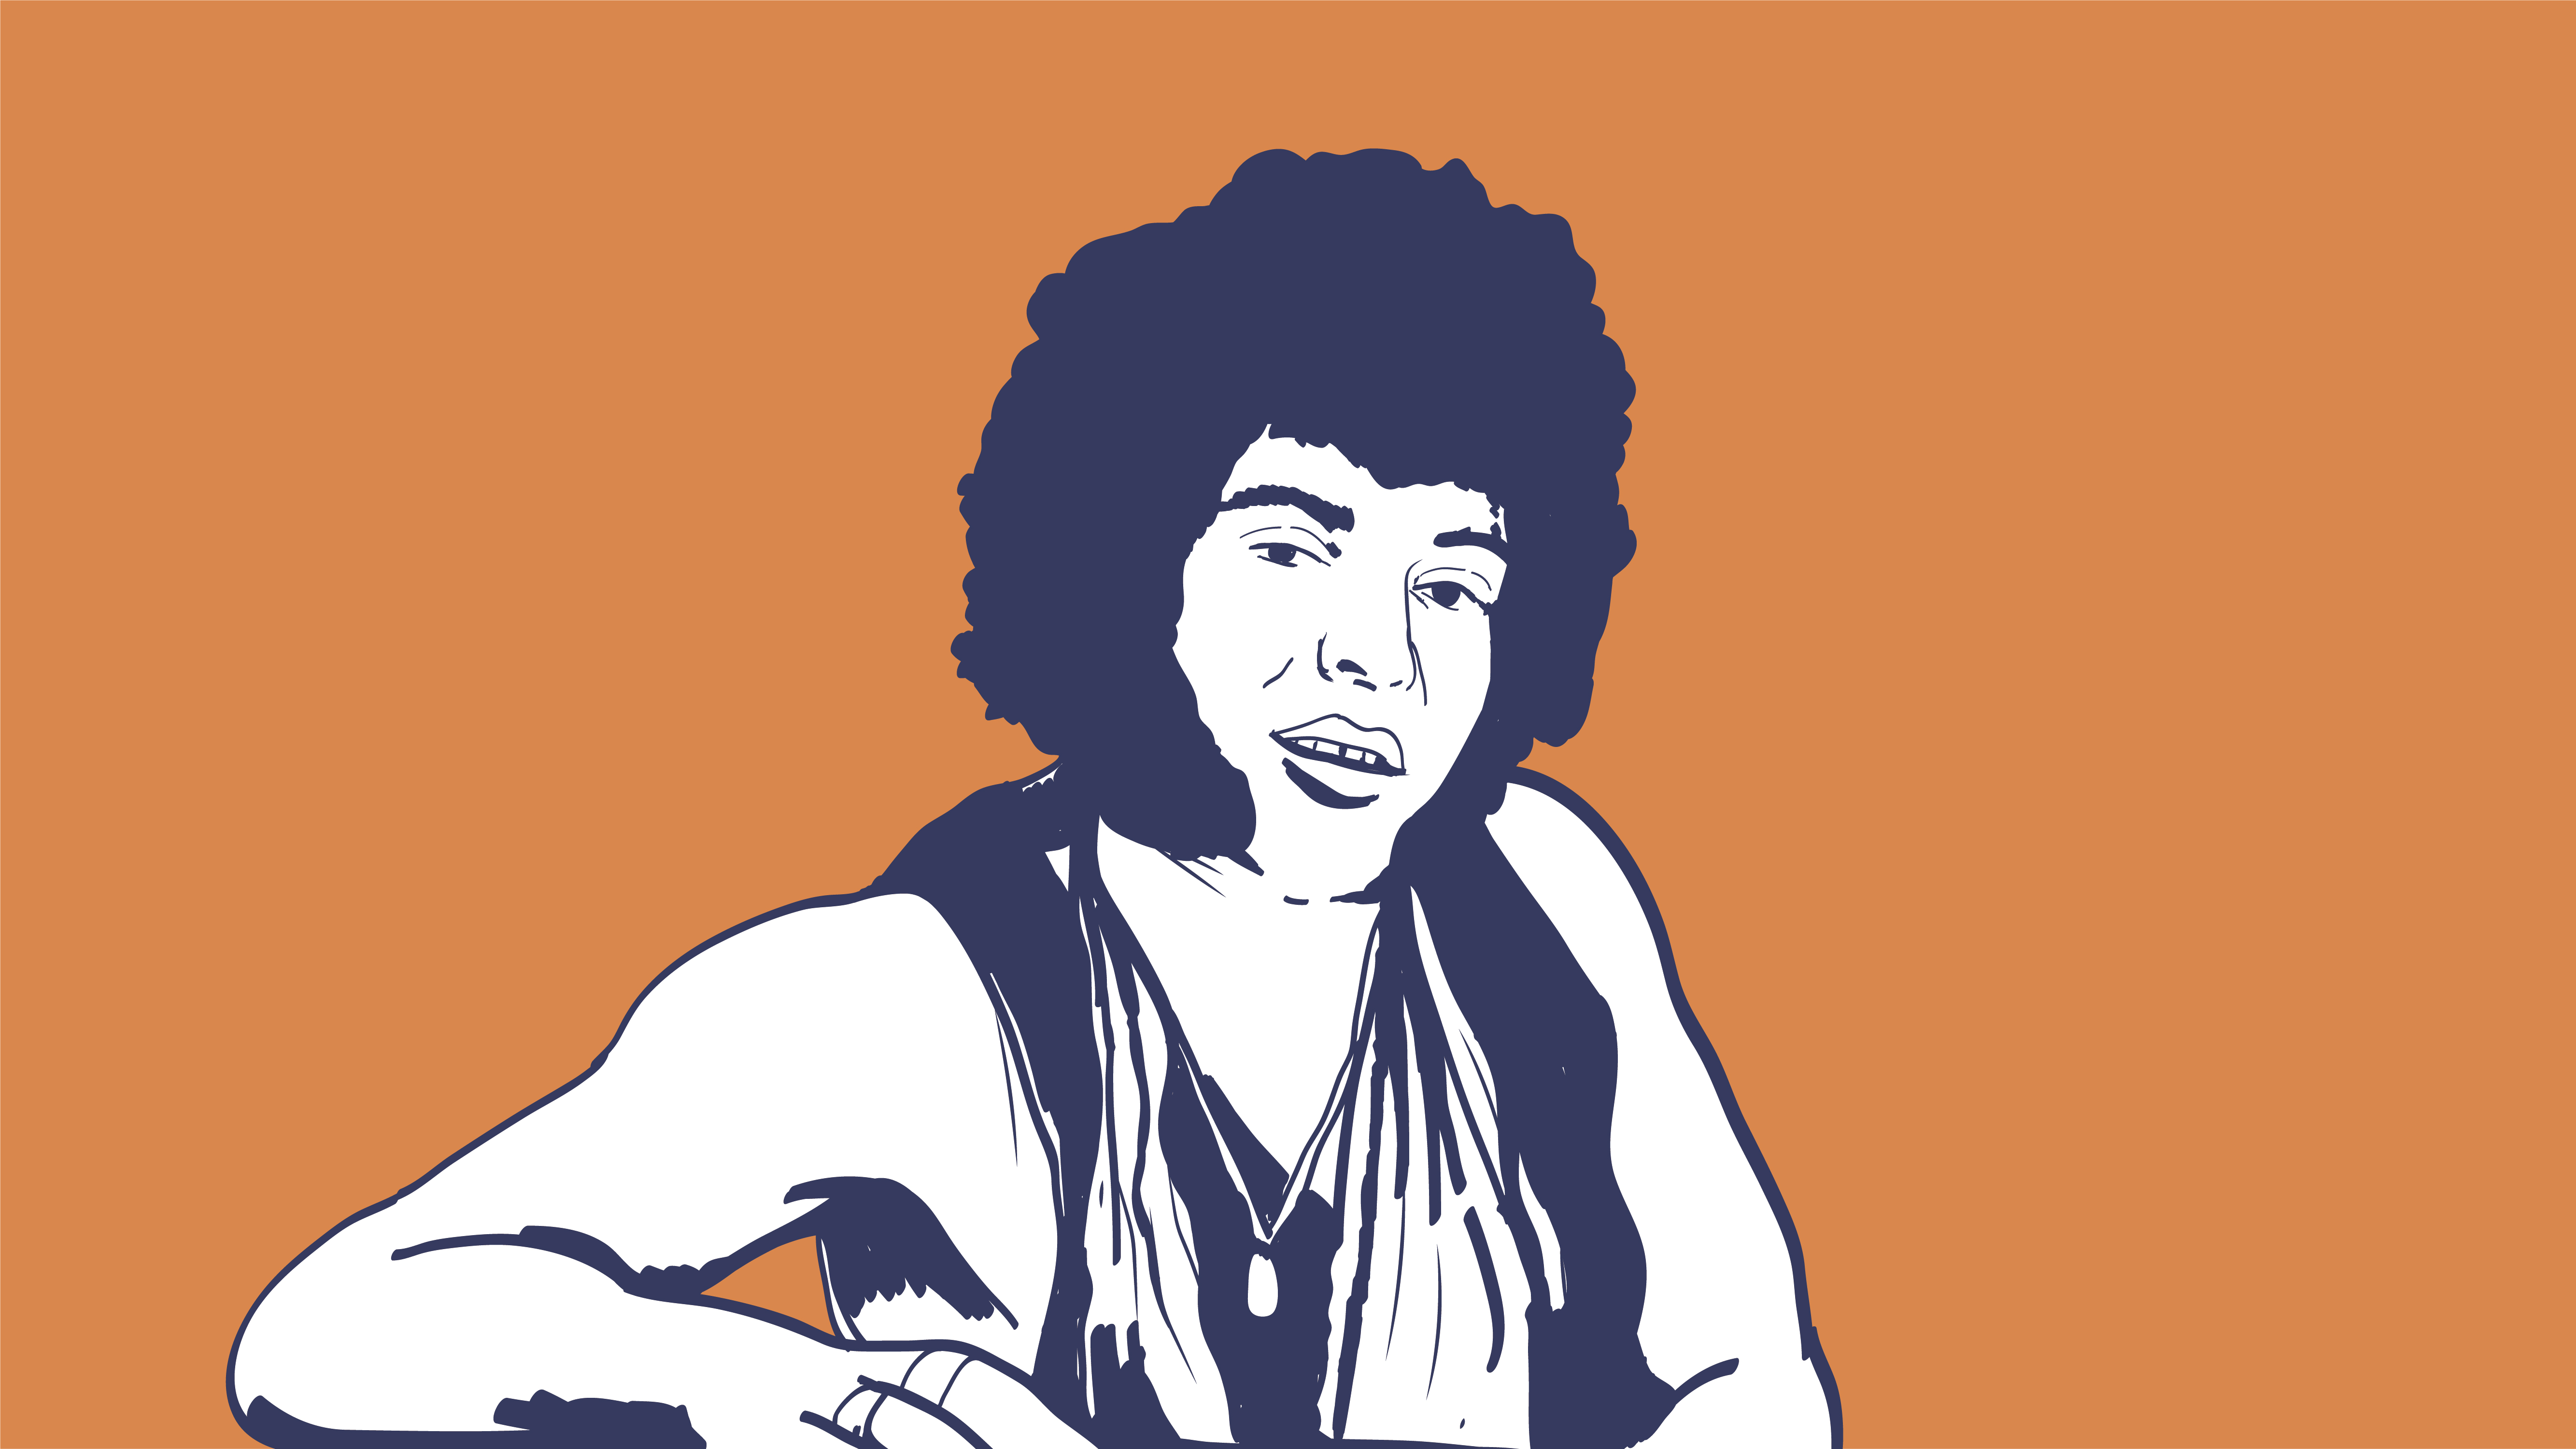 An illustration of Ray Dorset as Mungo Jerry, playing guitar.